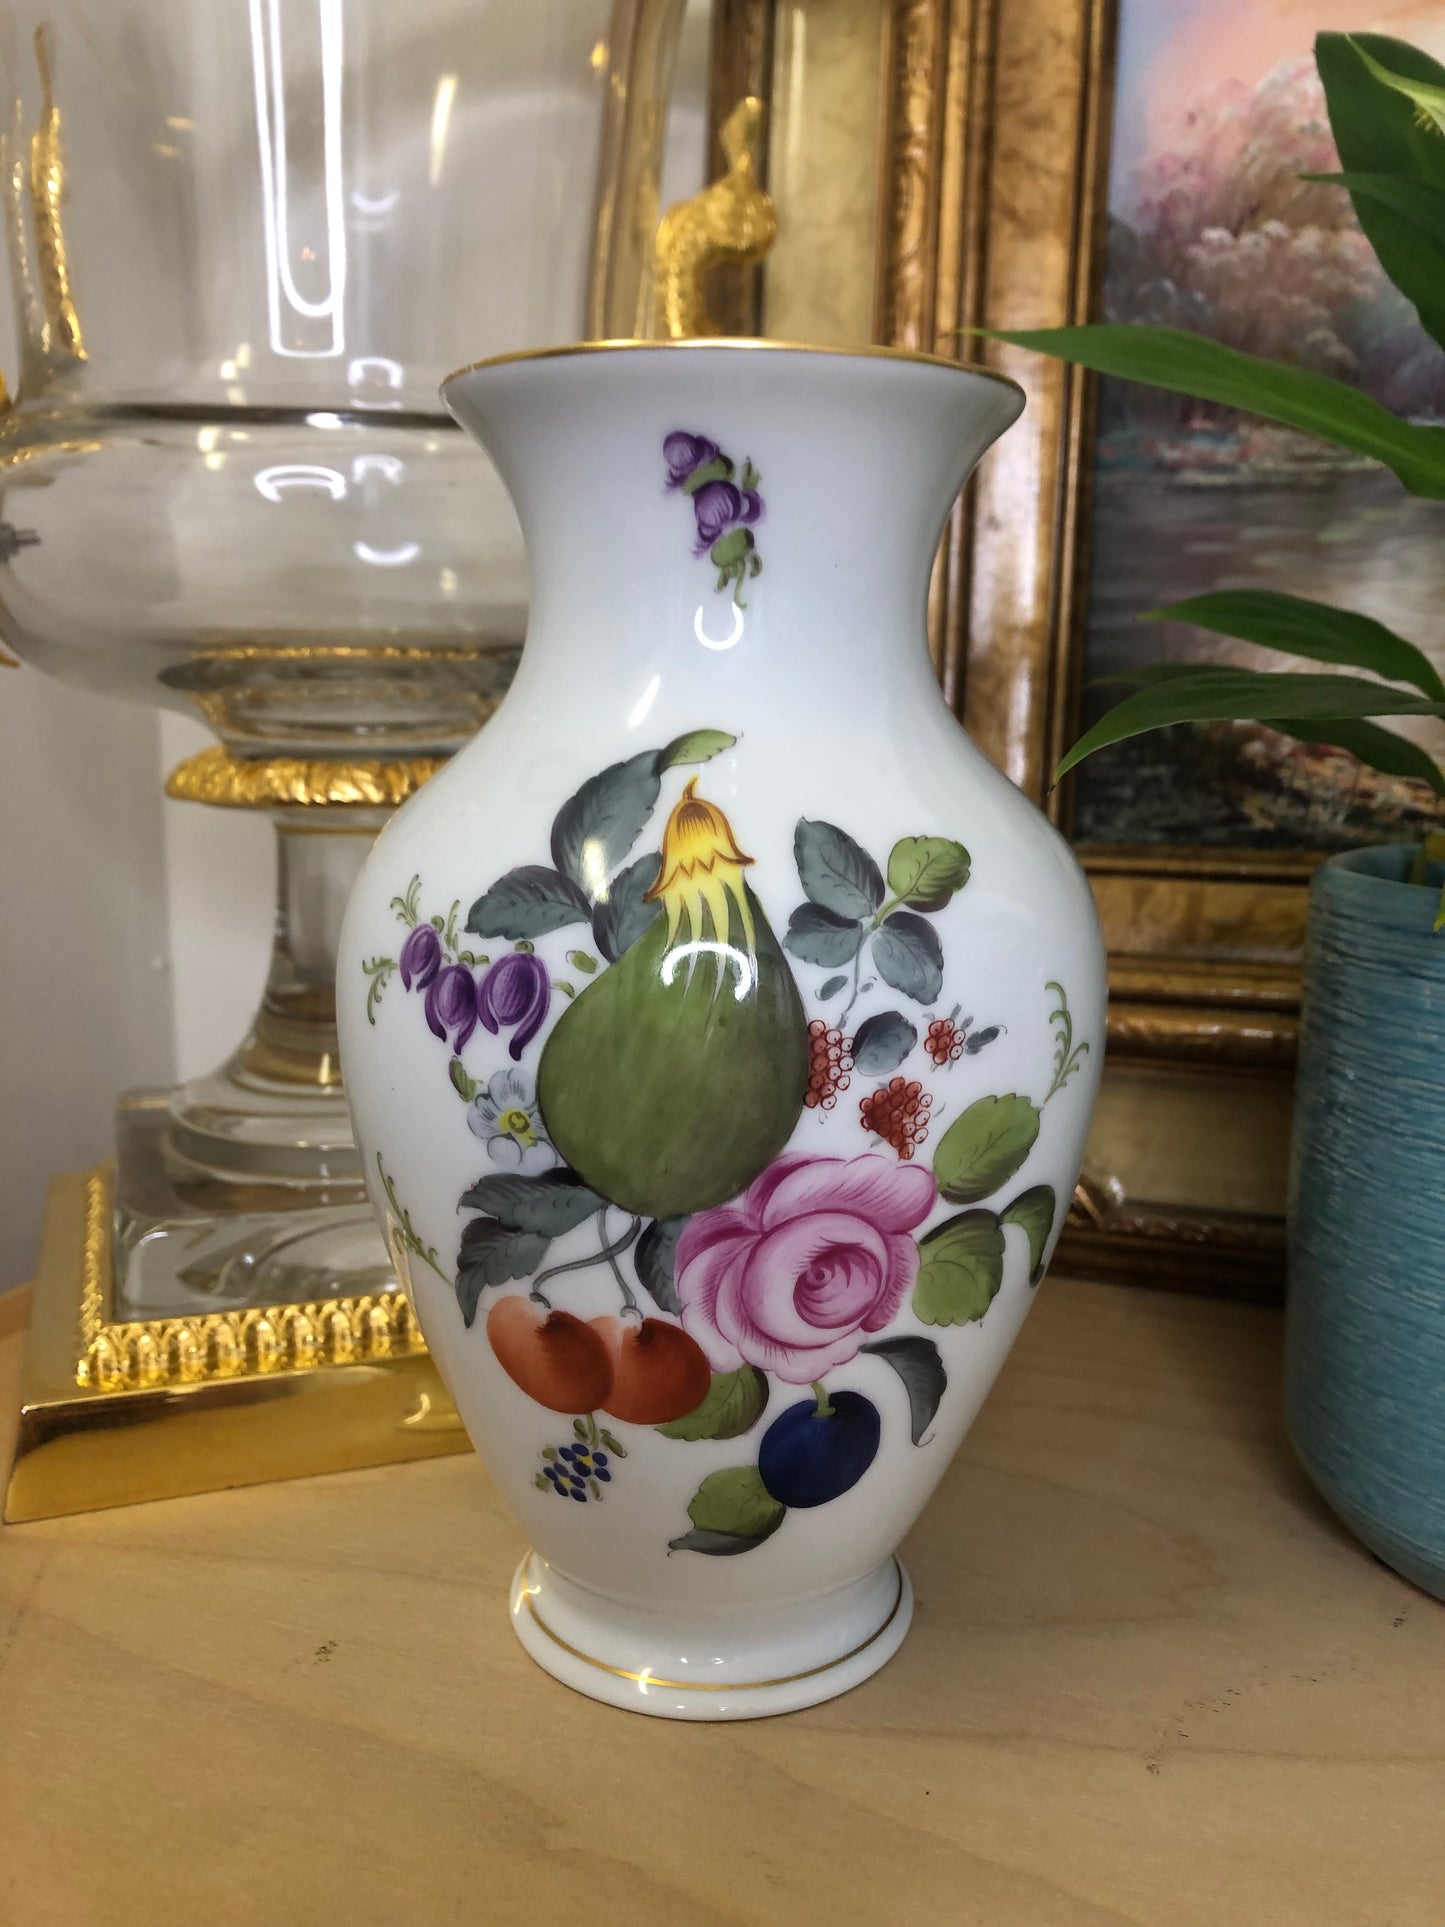 Vintage Herend "Printemps" Vase with Flowers, 7" Tall - As Is